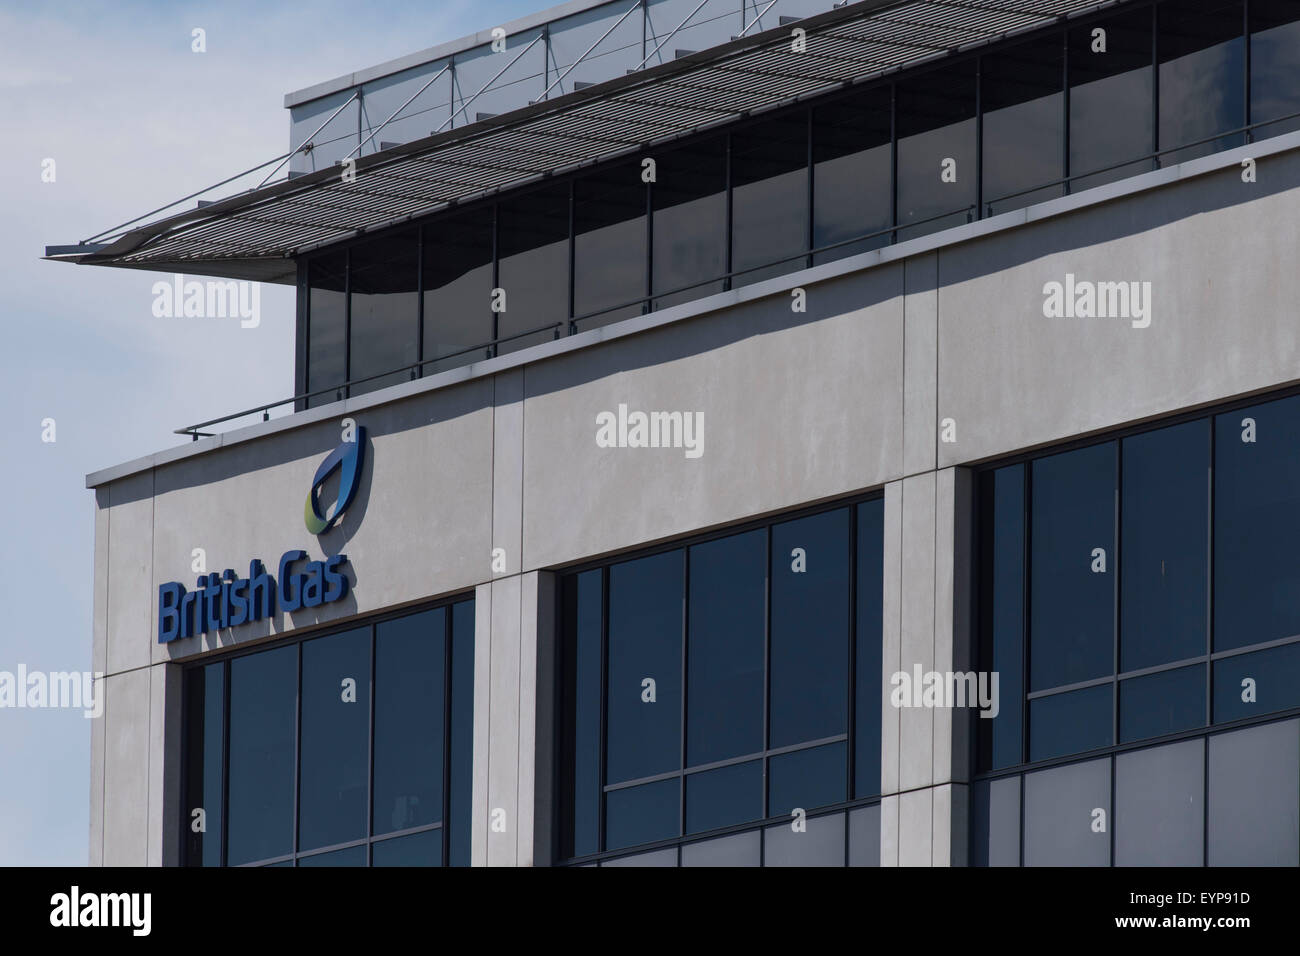 British Gas offices in Cardiff, Wales. British Gas is owned by Centrica and provides energy to millions of homes across the UK. Stock Photo